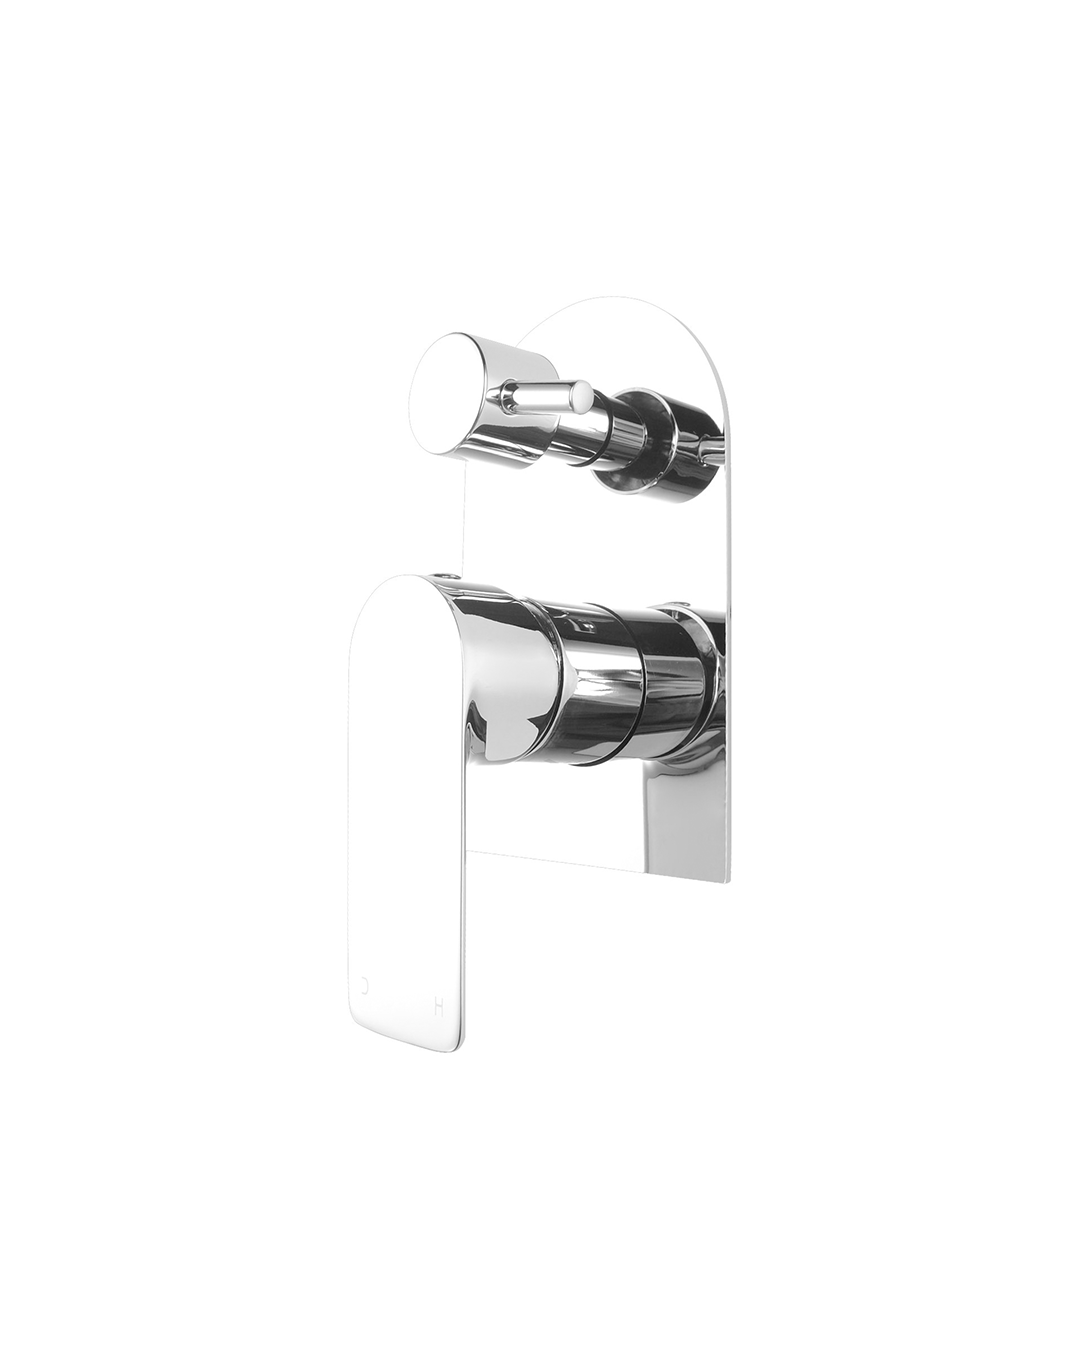 Wall Mixer with Diverter